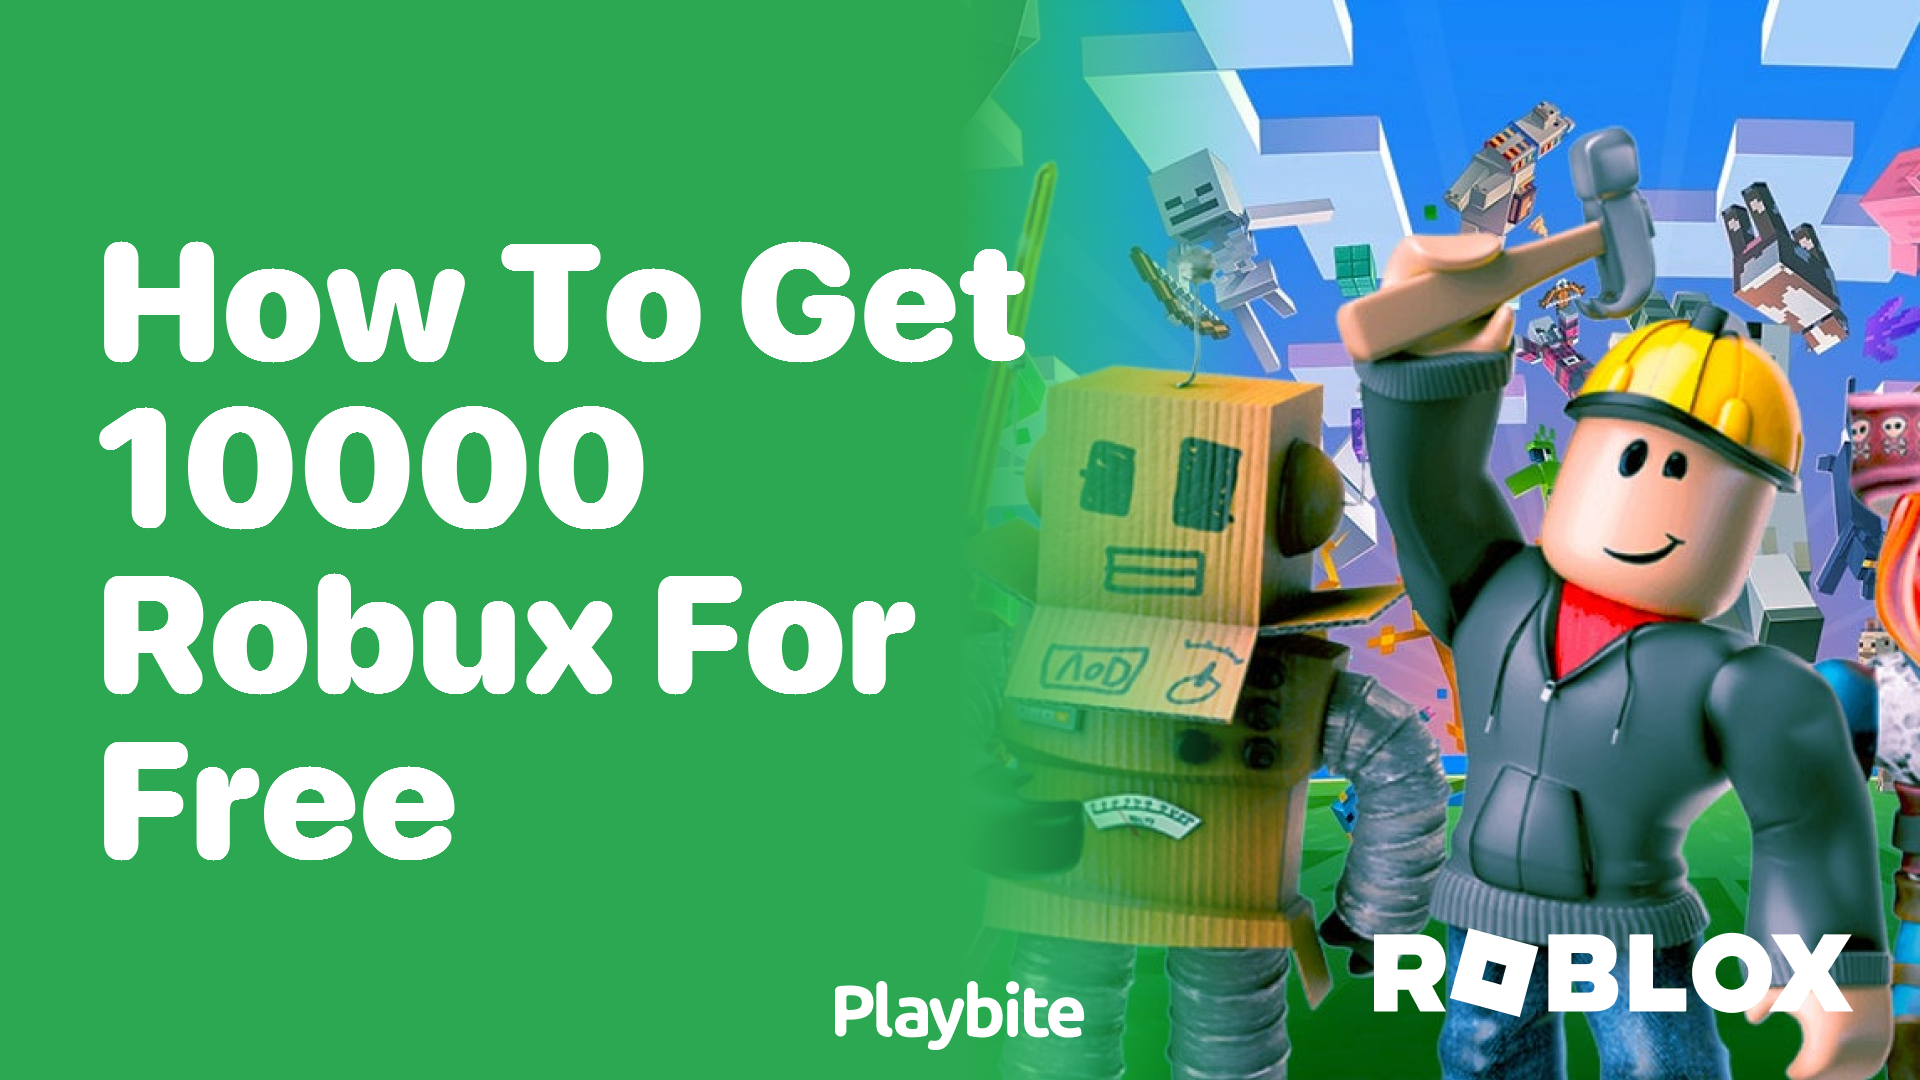 How to Get 10,000 Robux for Free